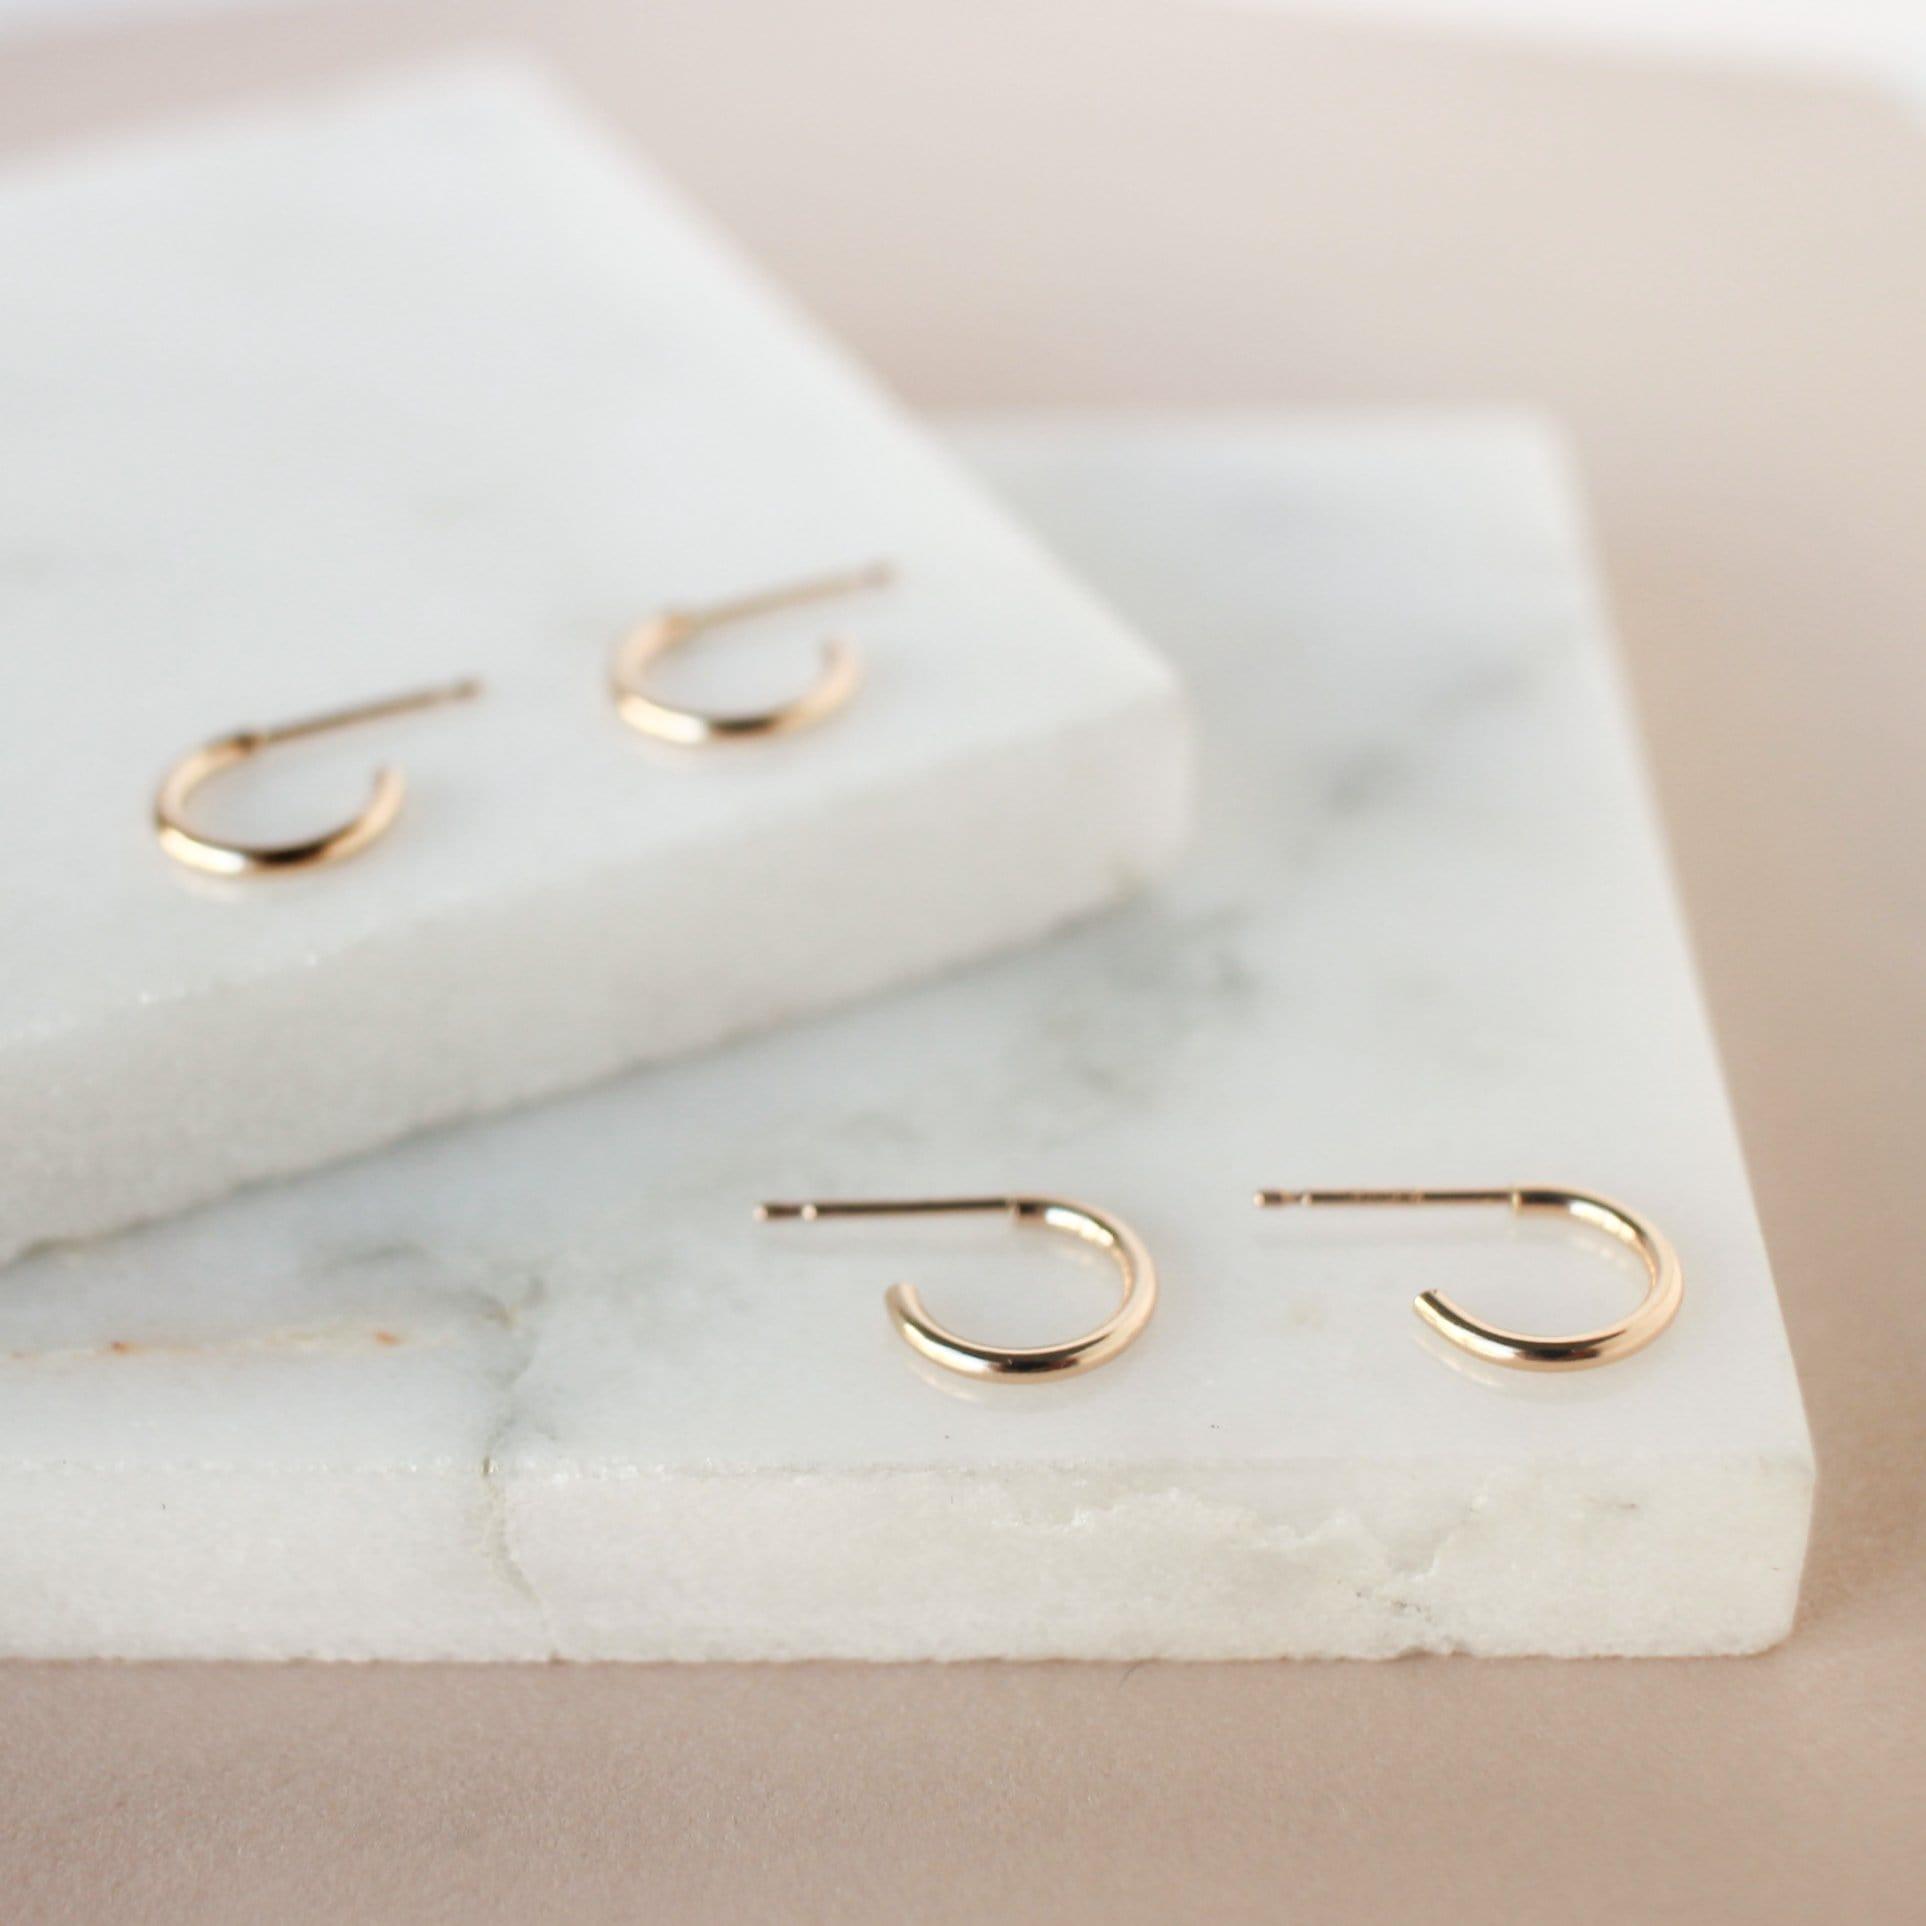 Tiny Everyday Hoop Earrings - Nolia Jewelry - Meaningful + Sustainably Handcrafted Jewelry